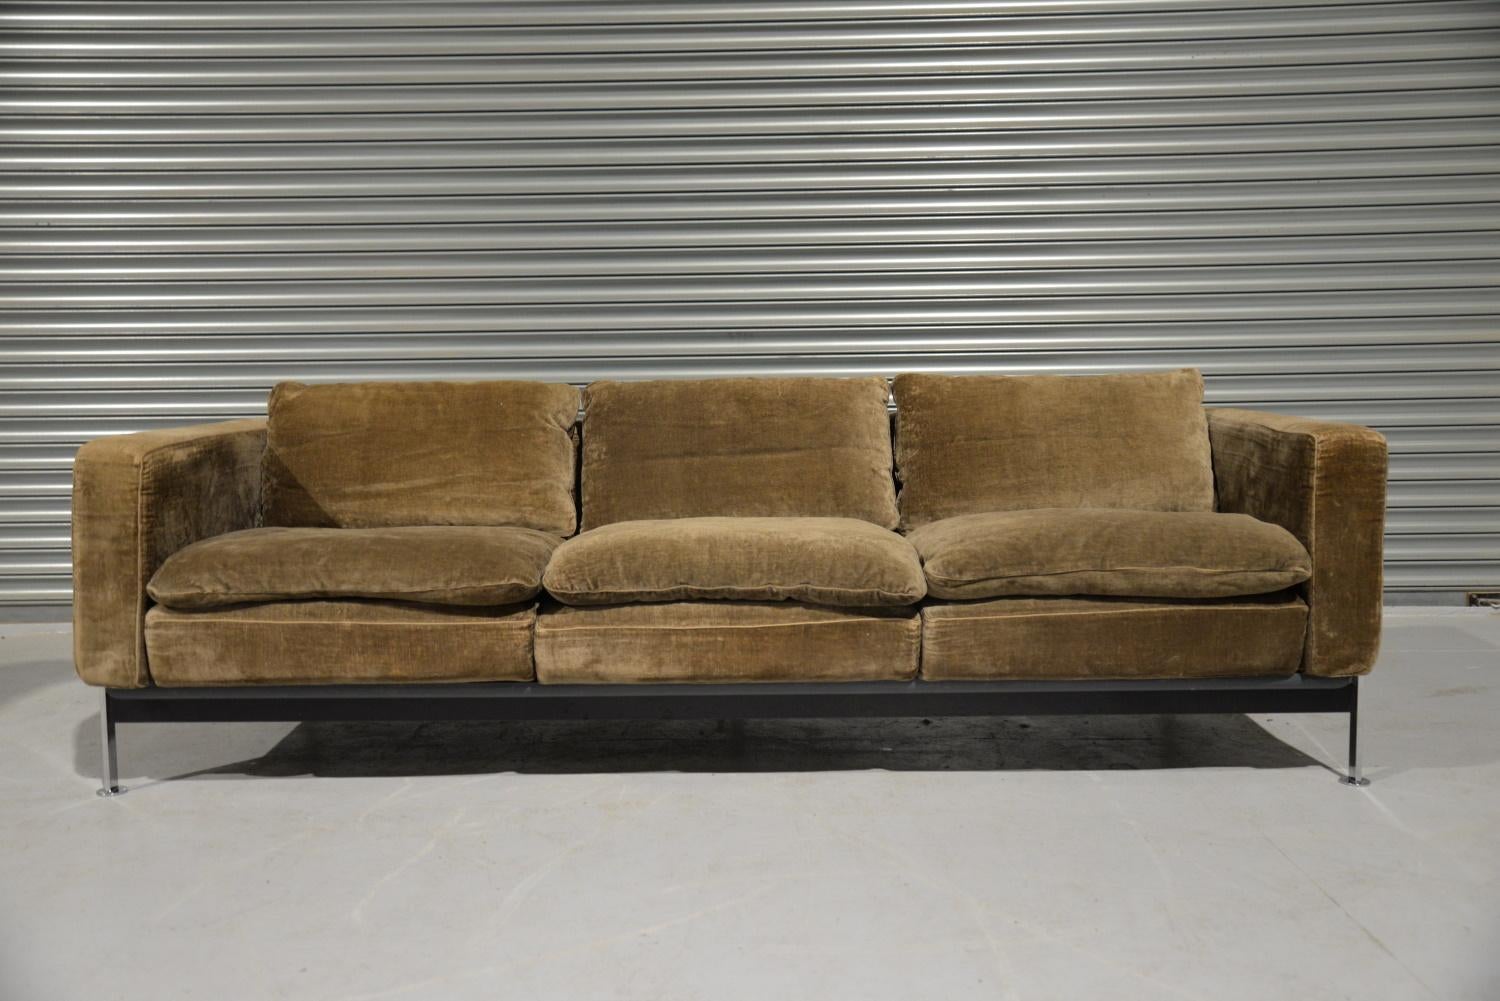 We are delighted to bring to you a highly coveted original Robert Haussmann De Sede RH 302 three seater sofa. These sofas are designed with a chromed plated iron frame that functions as a basket for the cushions making it extremely comforable. The